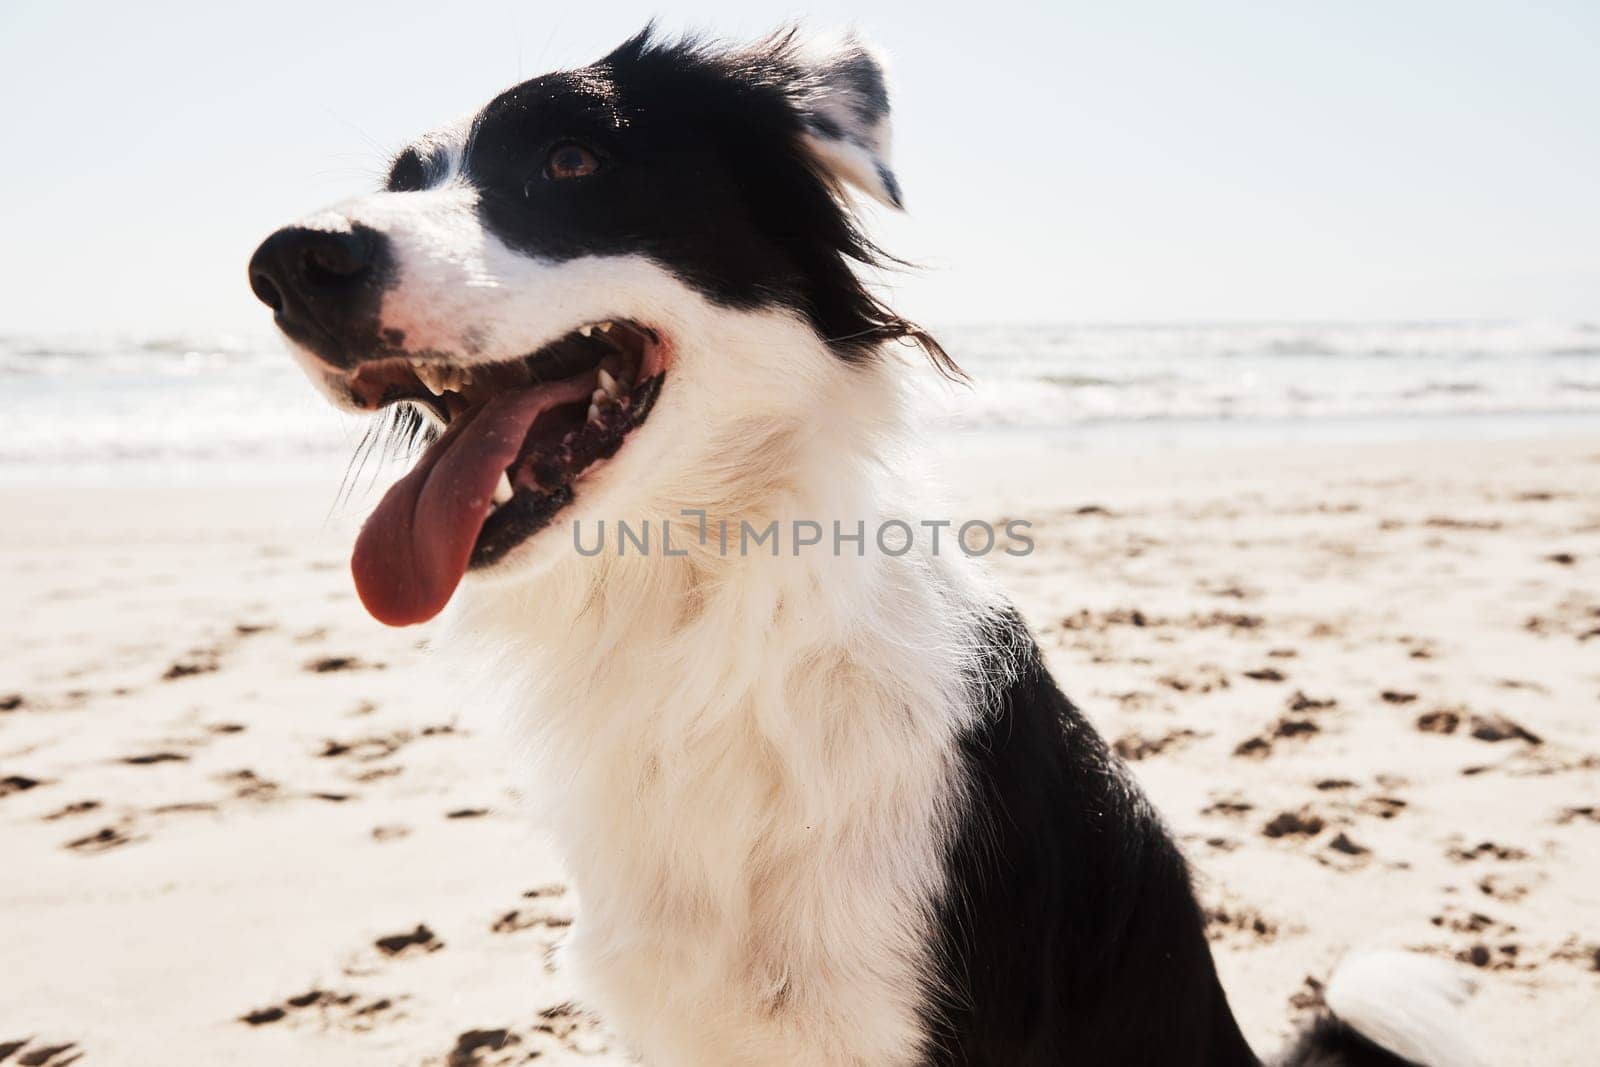 Beaches are a great place for pets to cool off. an adorable Border Collie at the beach